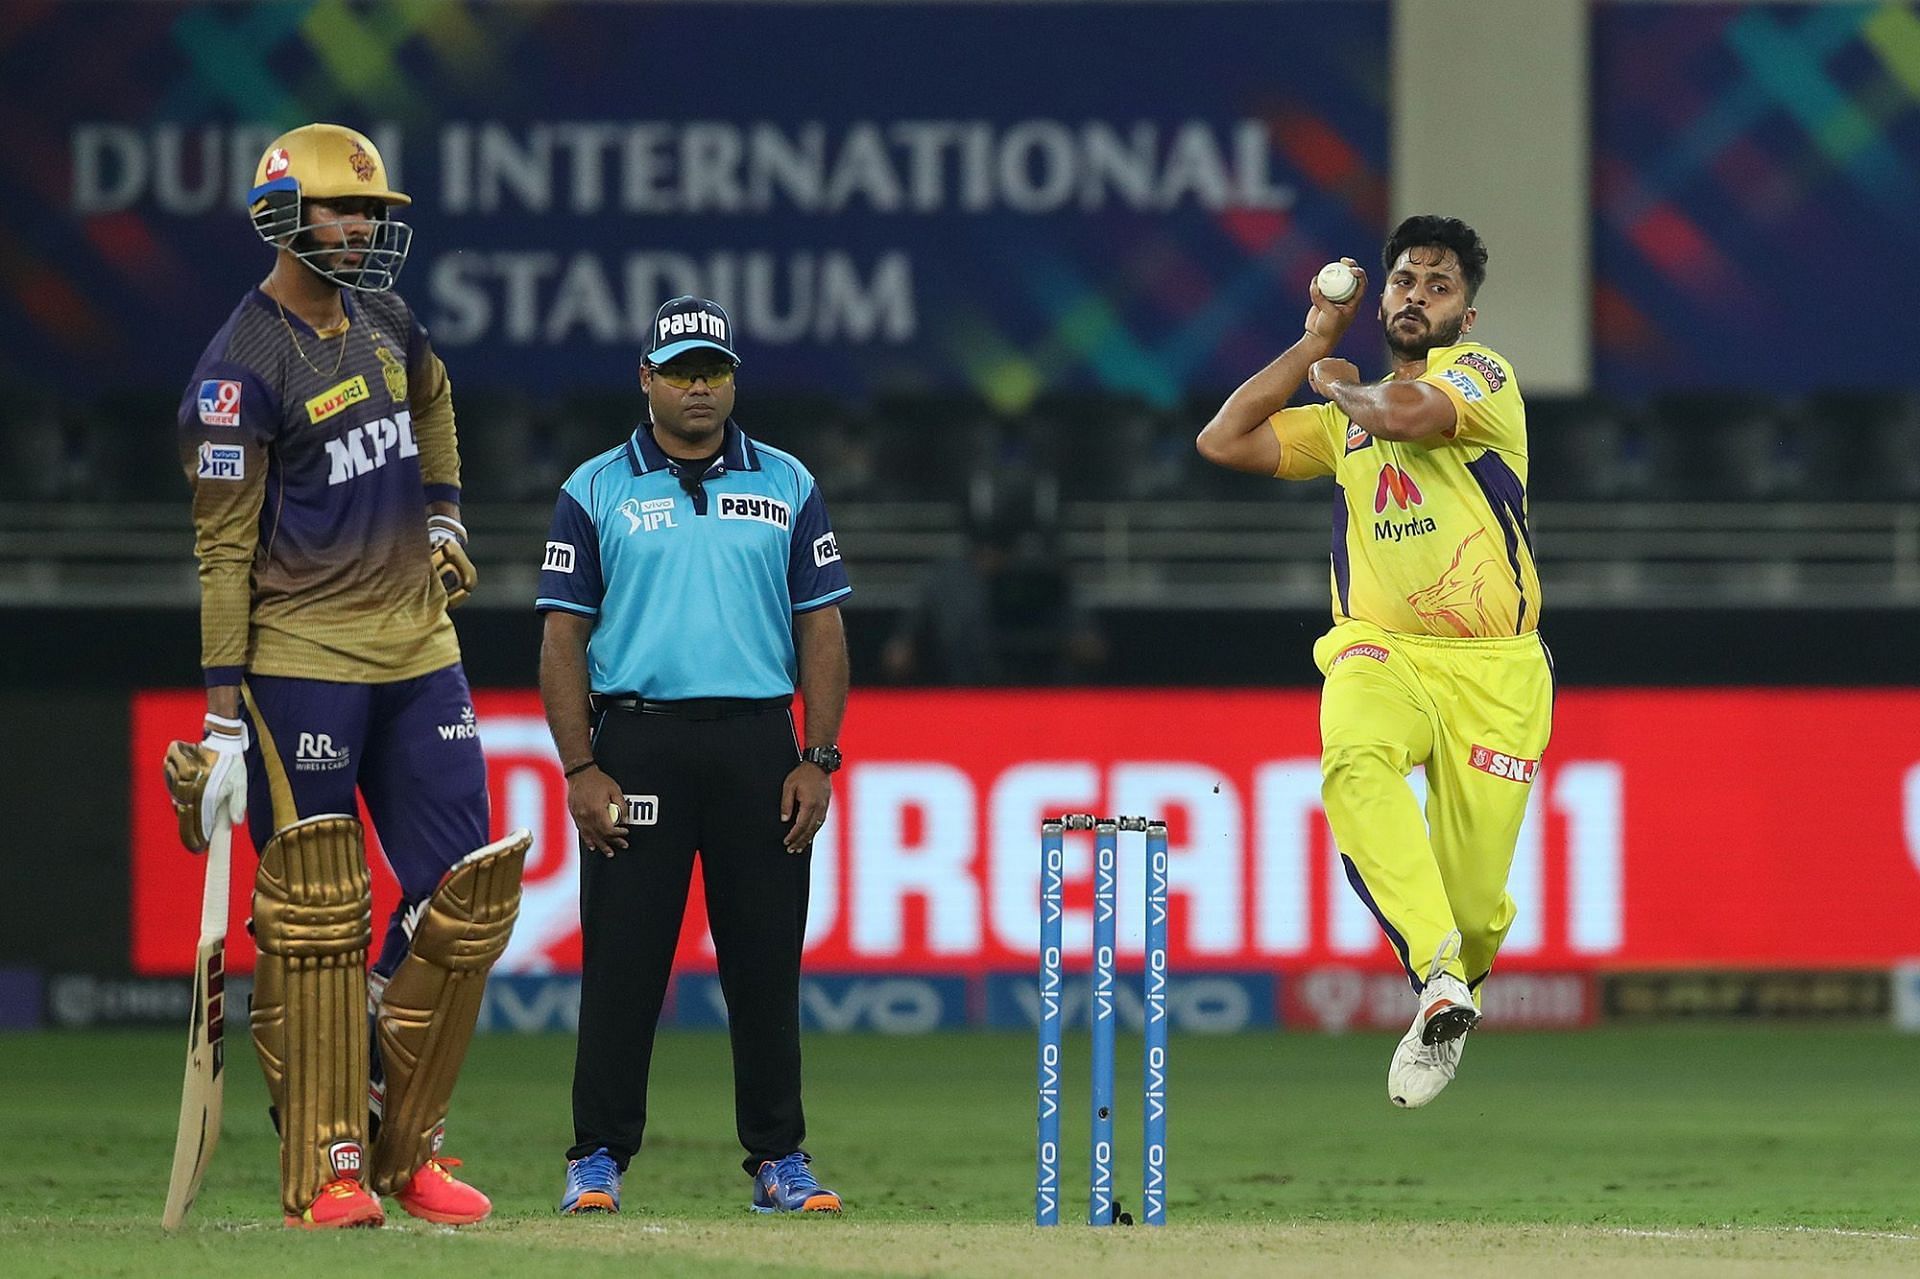 Shardul Thakur picked up three wickets in the final (Pic Credits: IPL)